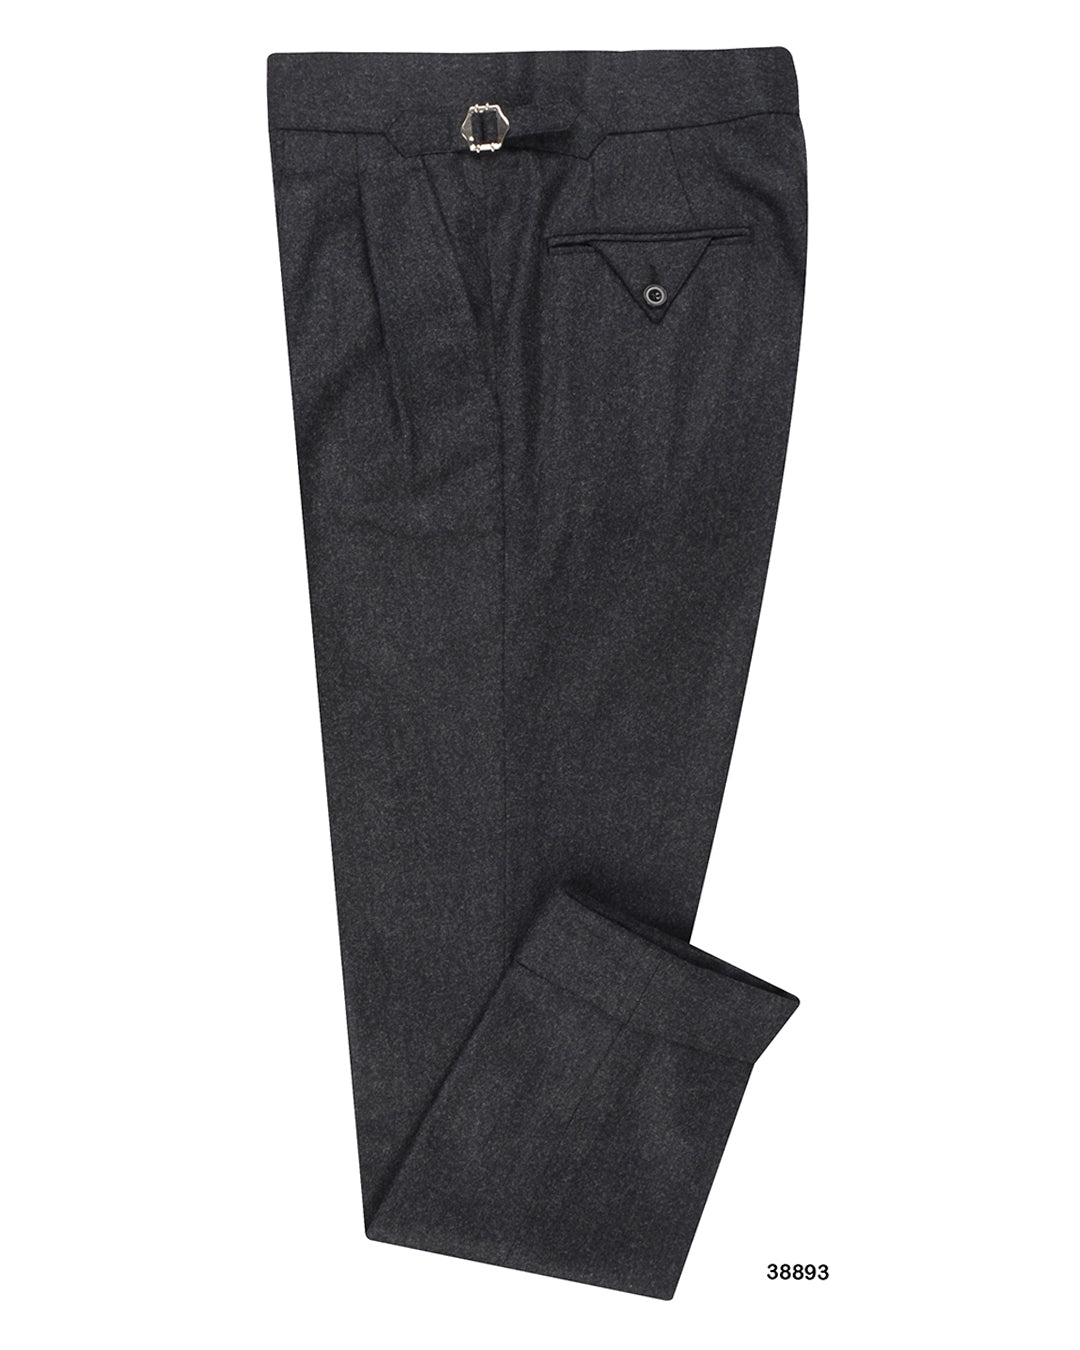 Holland Sherry Classic Worsted Flannel Dark Charcoal Flannel